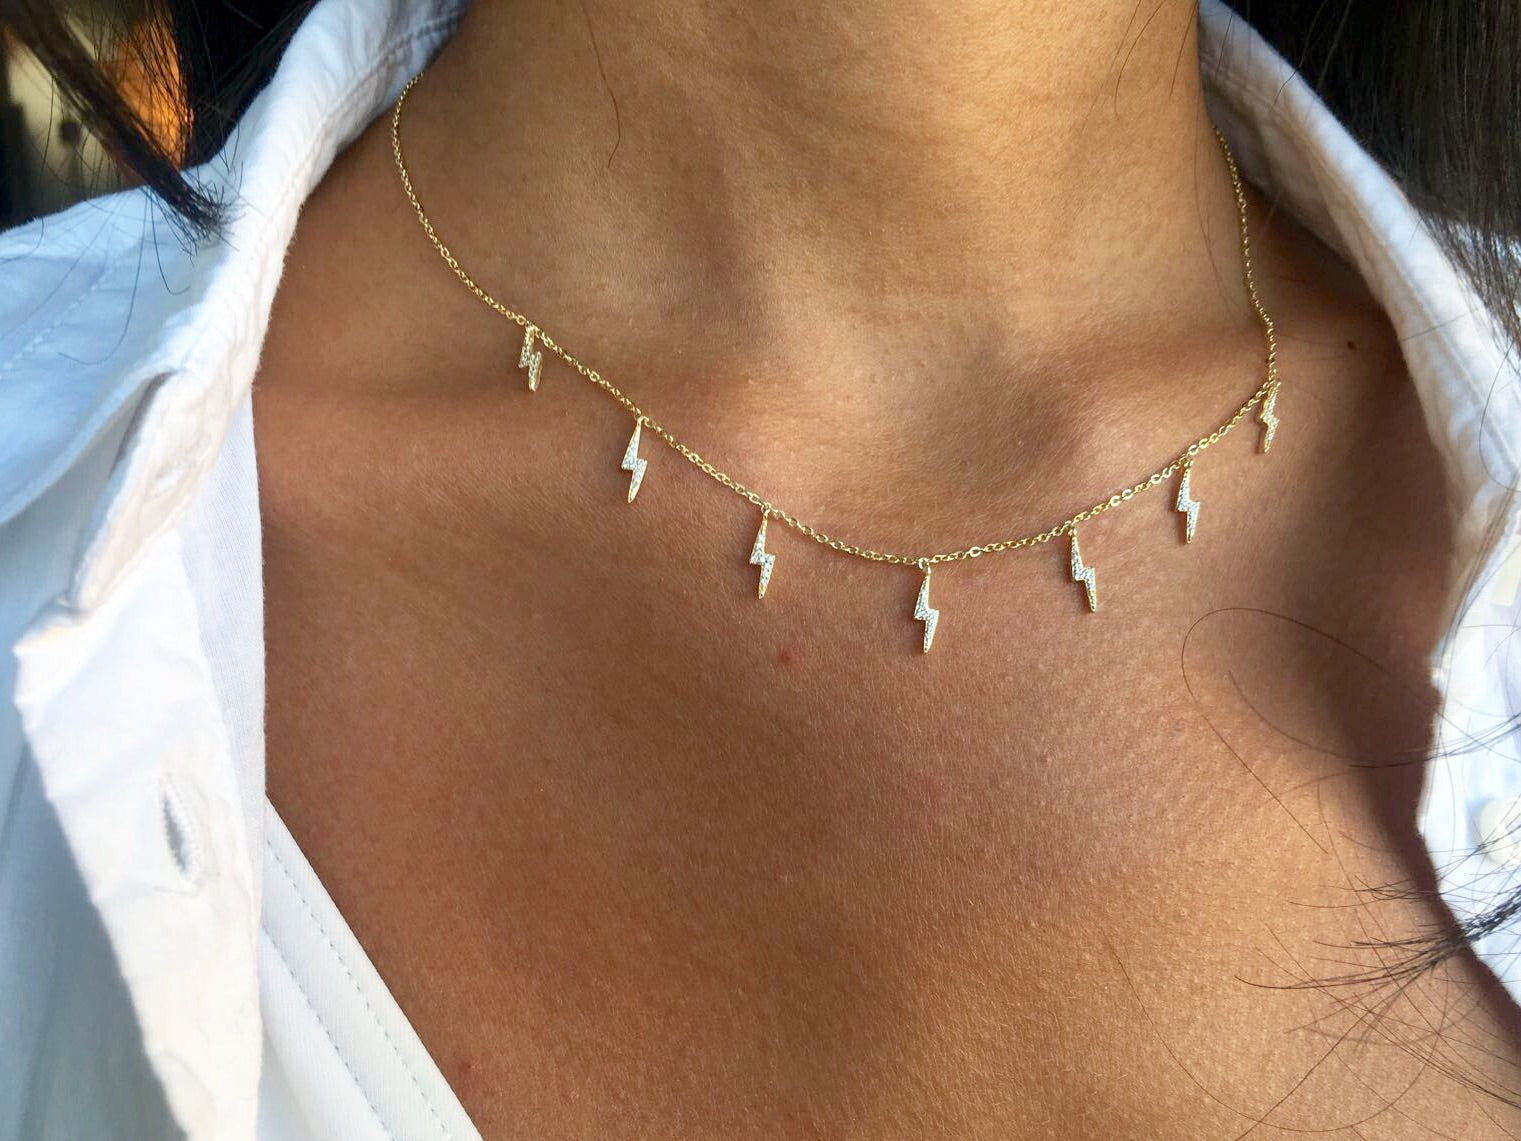 Hanging Lightening Bolt Necklace - Retail Therapy Jewelry